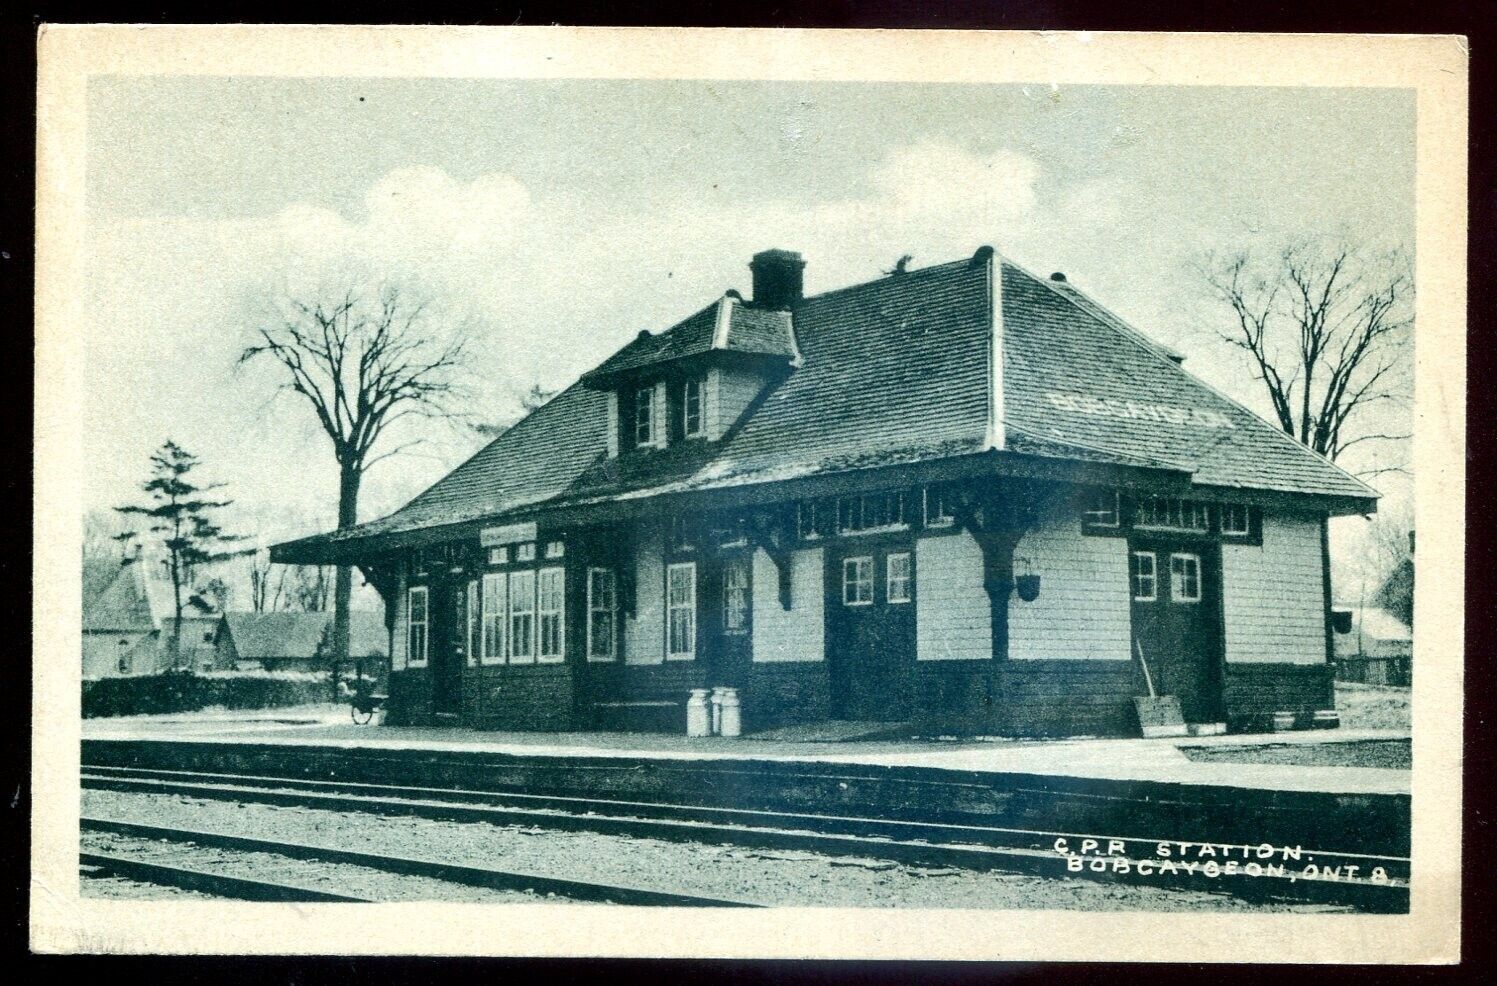 BOBCAYGEON Ontario Postcard 1920s CPR Train Station